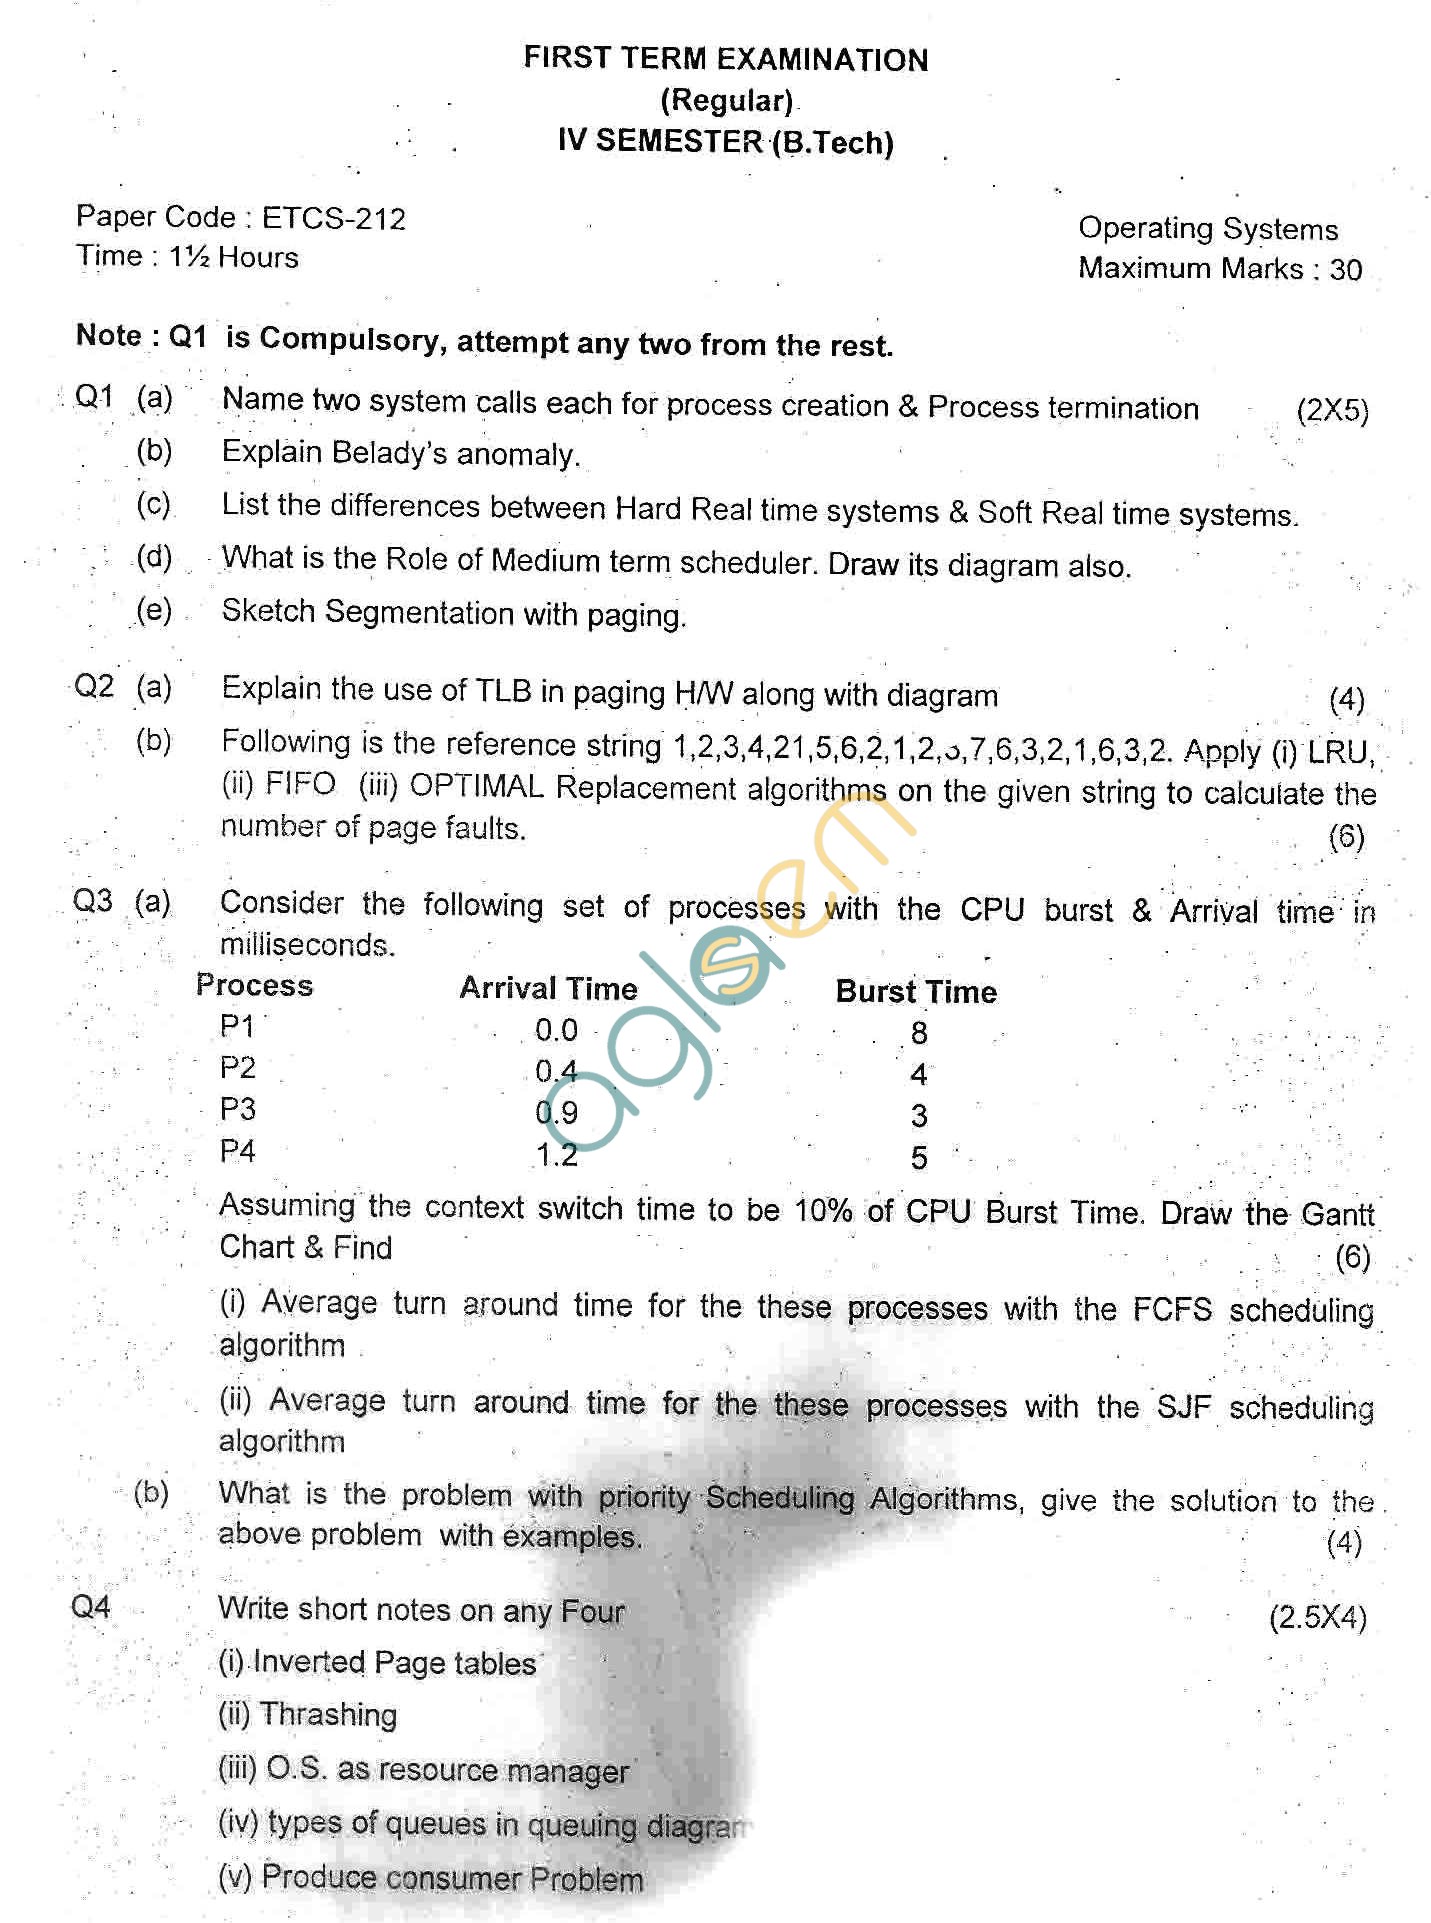 GGSIPU Question Papers Fourth Semester  First Term 2012  ETCS-212